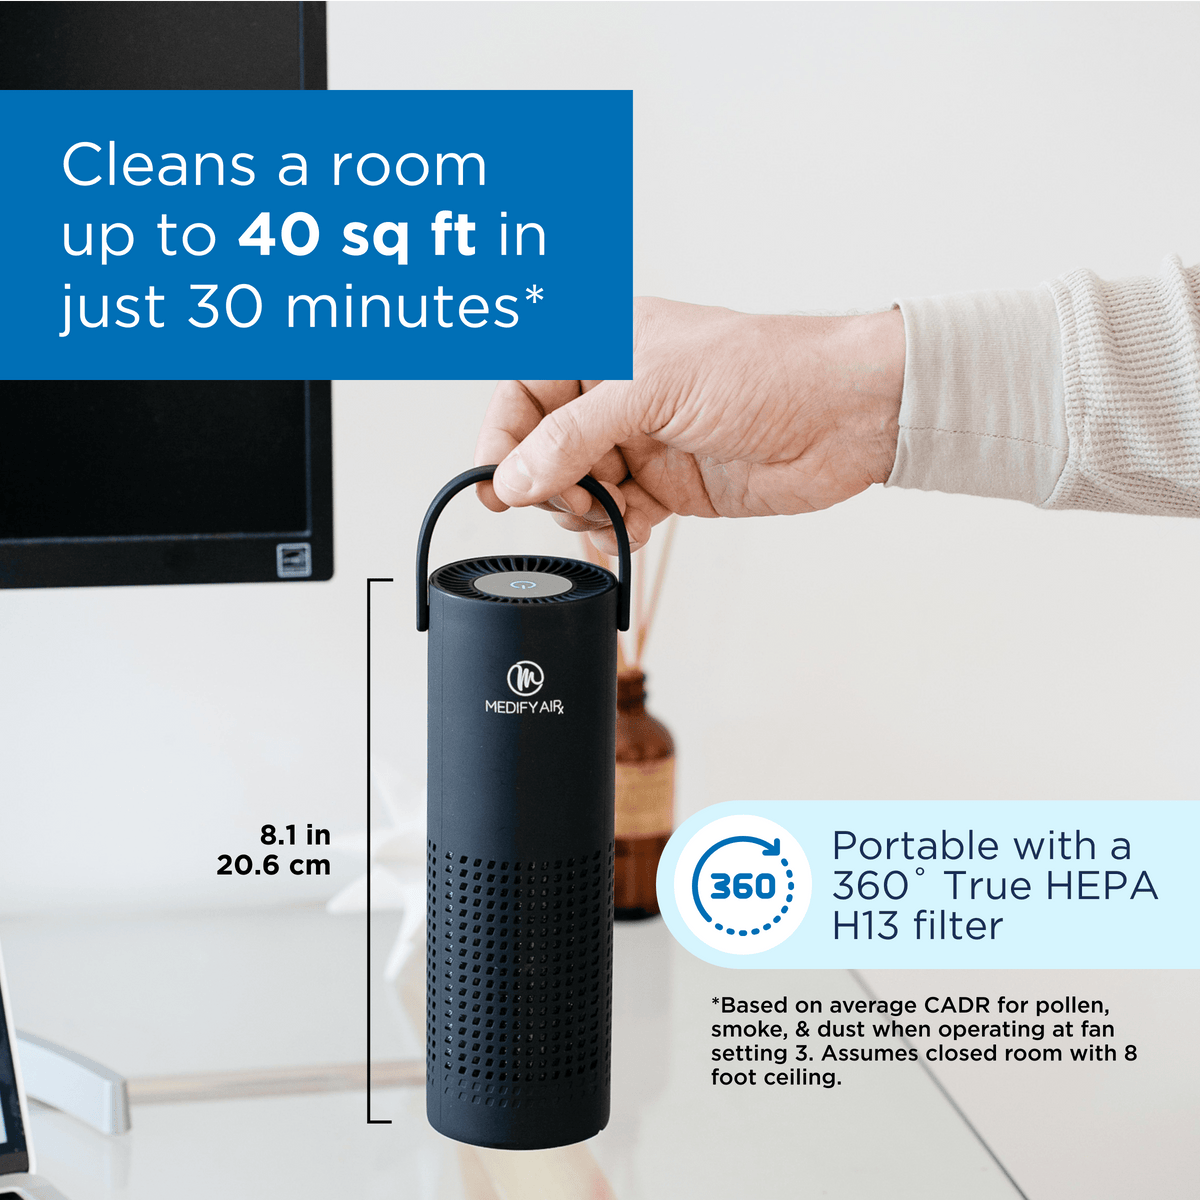 Medify Air MA-10 Air Purifier Removes 99.9% of Particles